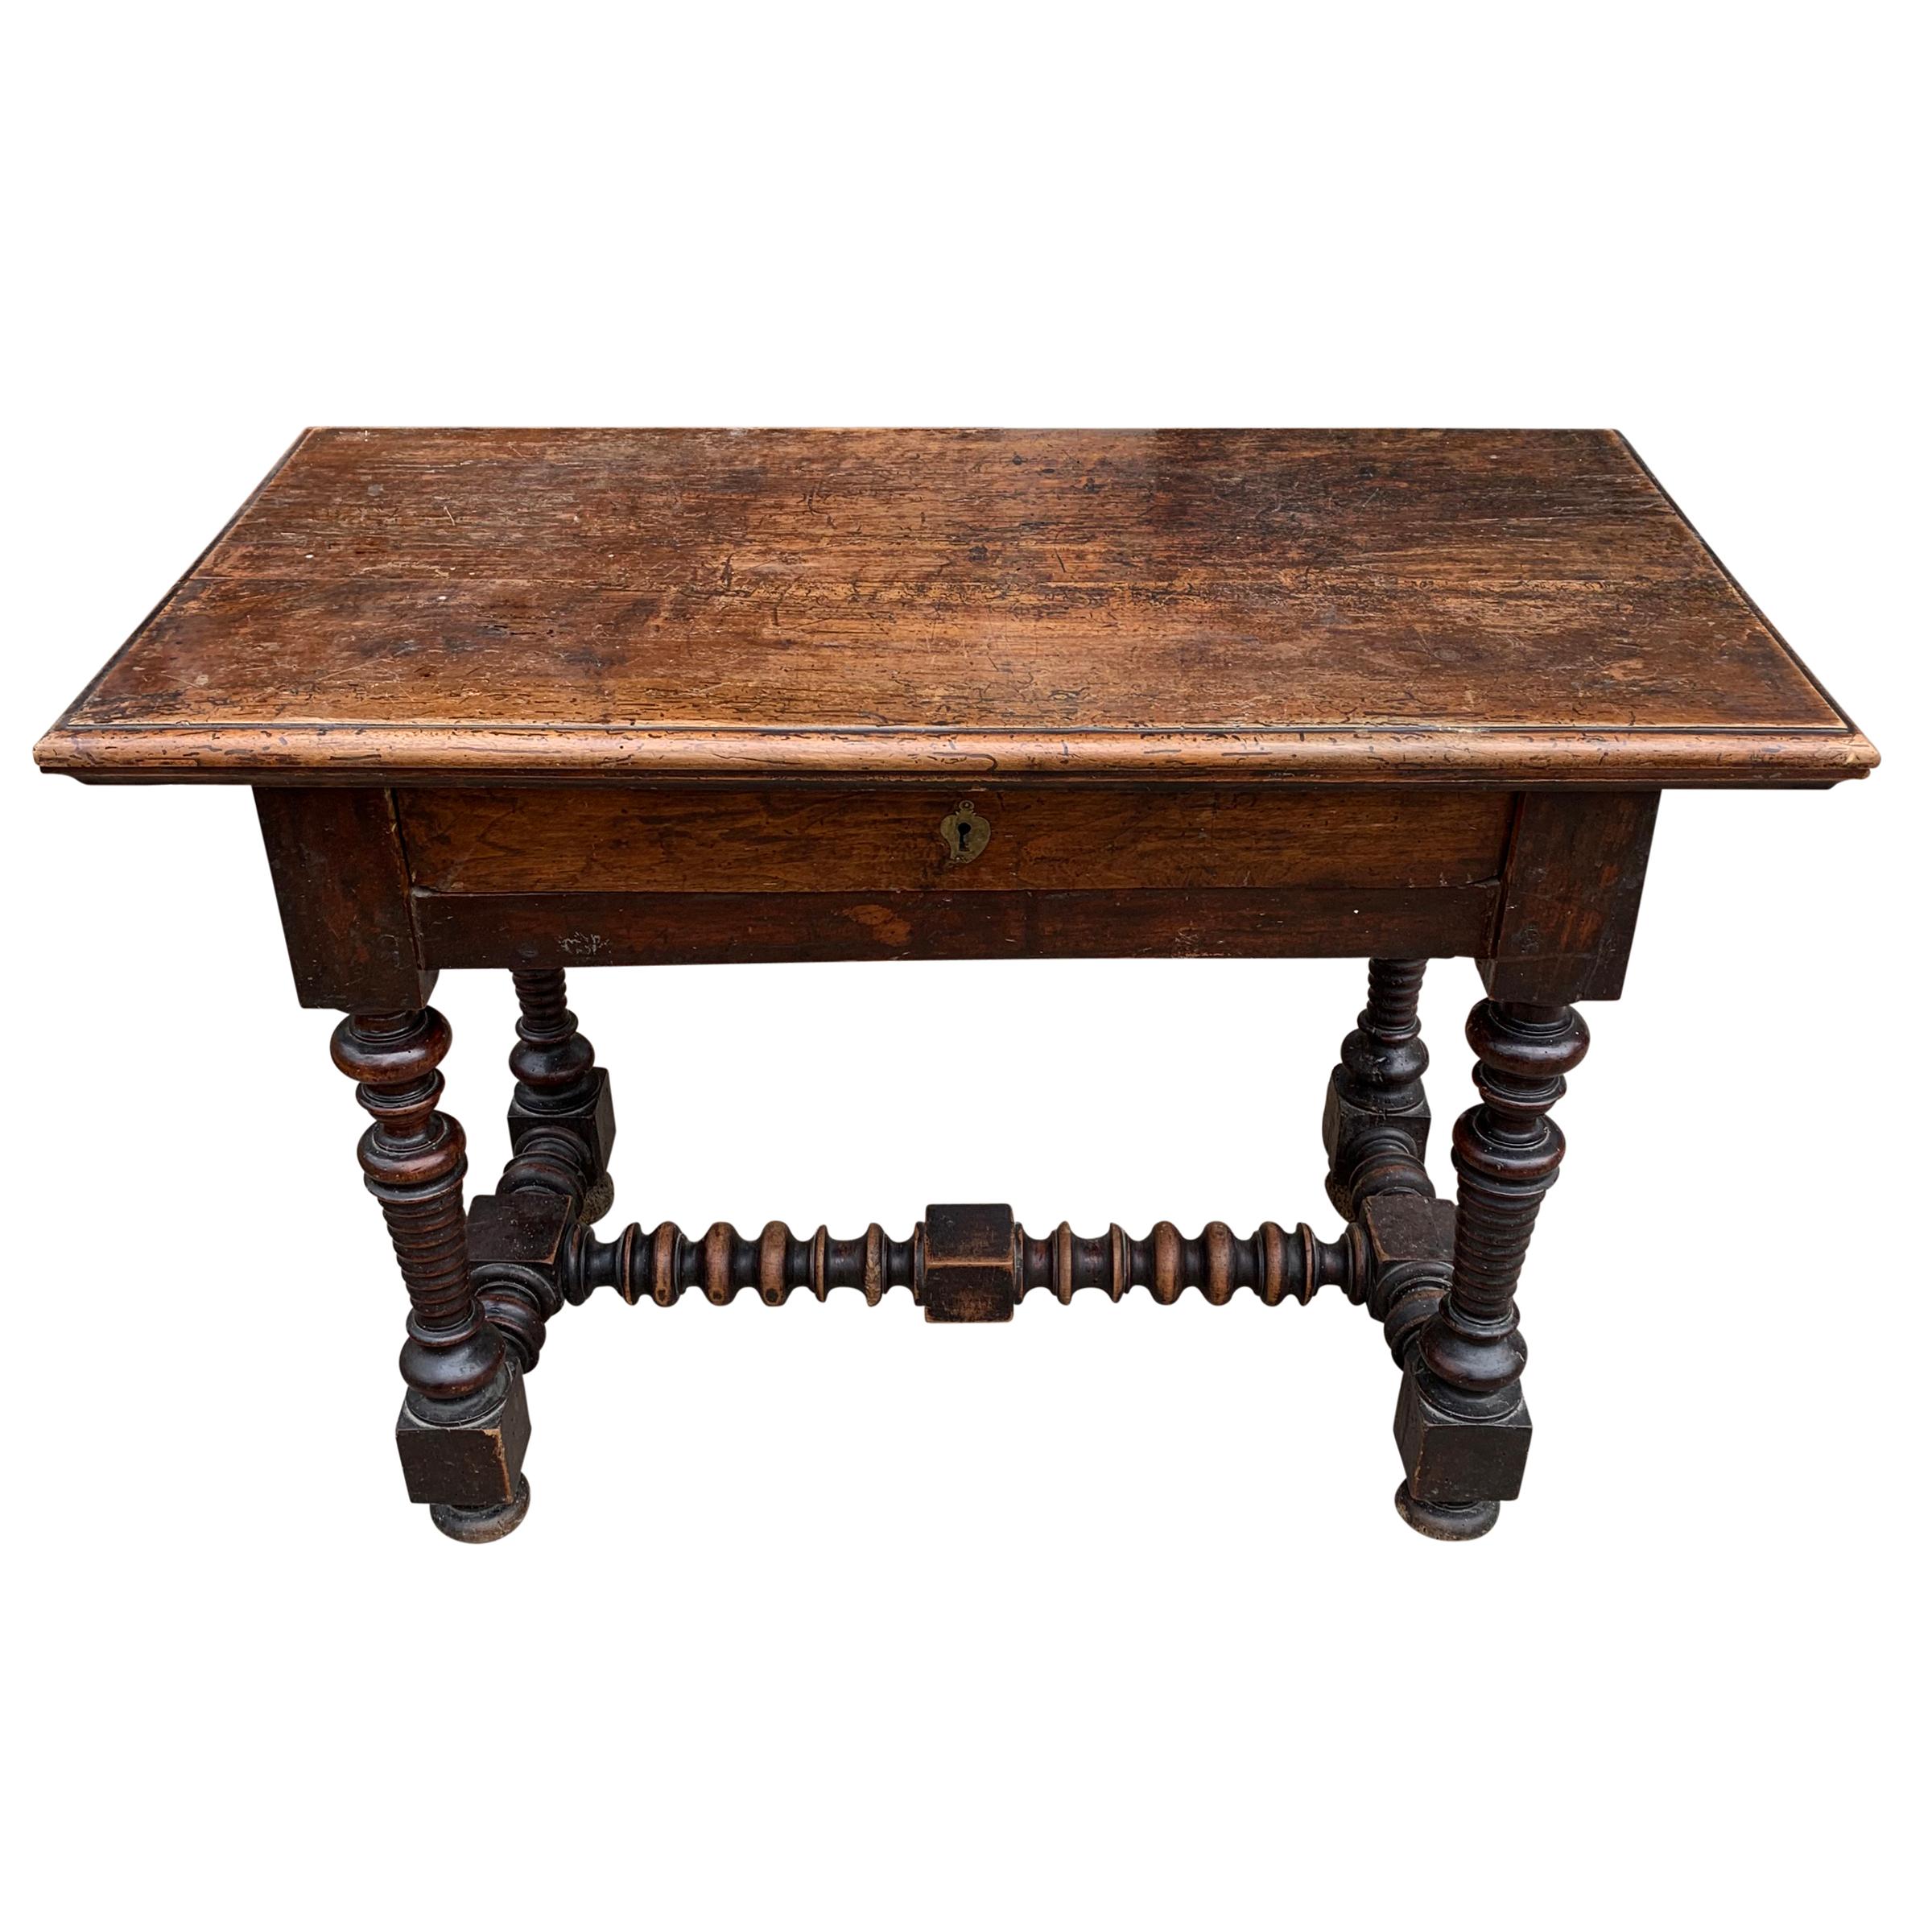 An incredible 18th century Italian hall table with elaborate exaggerated turned legs and stretchers, one drawer, a wonderful patina, and lots of personality! Lock on drawer is missing.